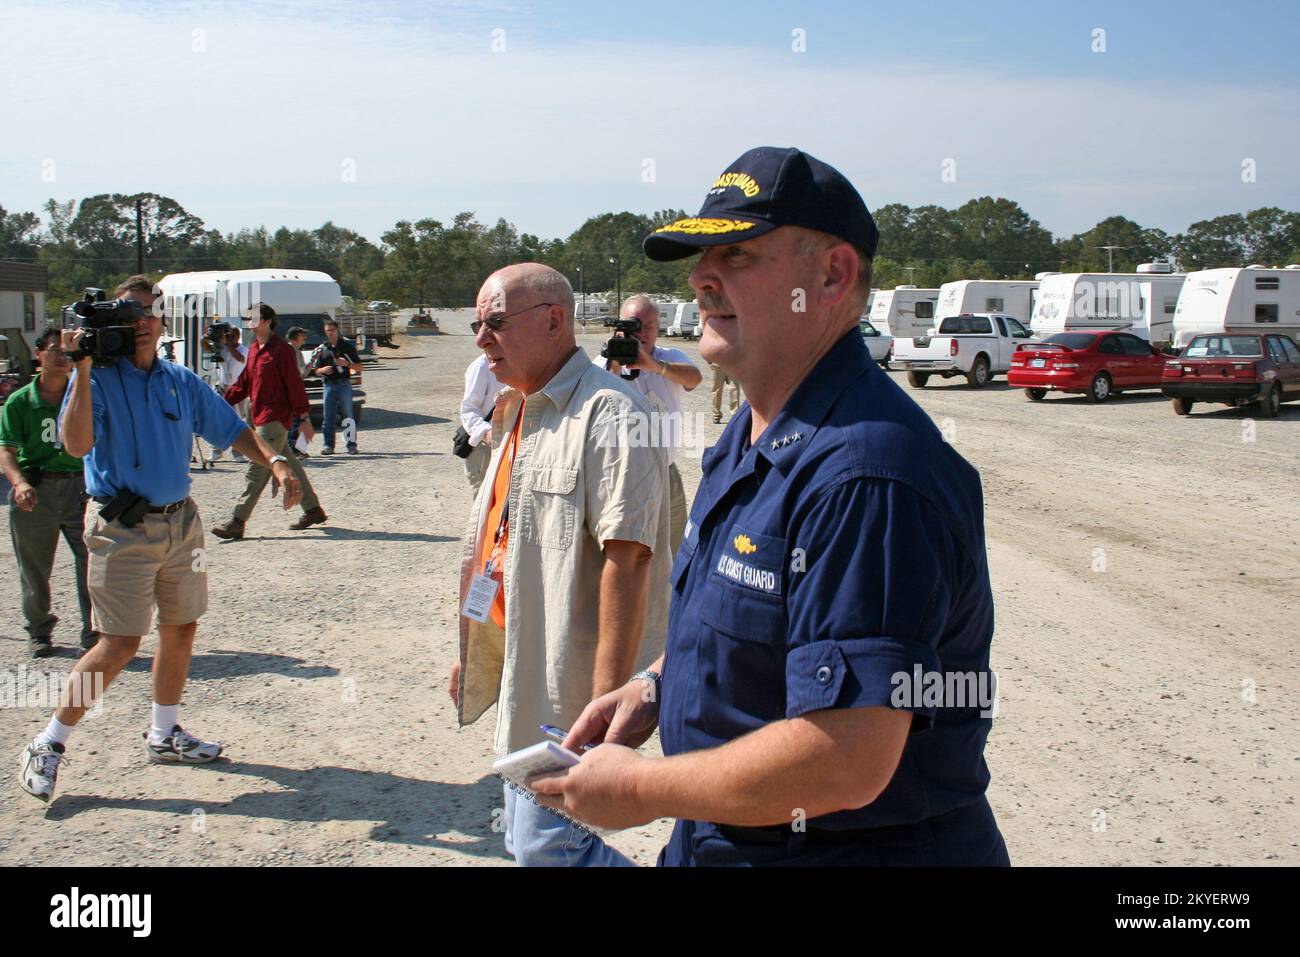 Hurricane Katrina/Hurricane Rita, Baker, LA October 8, 2005 - USCG Vice Admiral Thad Allen, Principal Federal Official for FEMA's Gulf Coast recovery efforts, toured the new 573-unit trailer park provided by FEMA as temporary housing for hurricane evacuees. Stock Photo